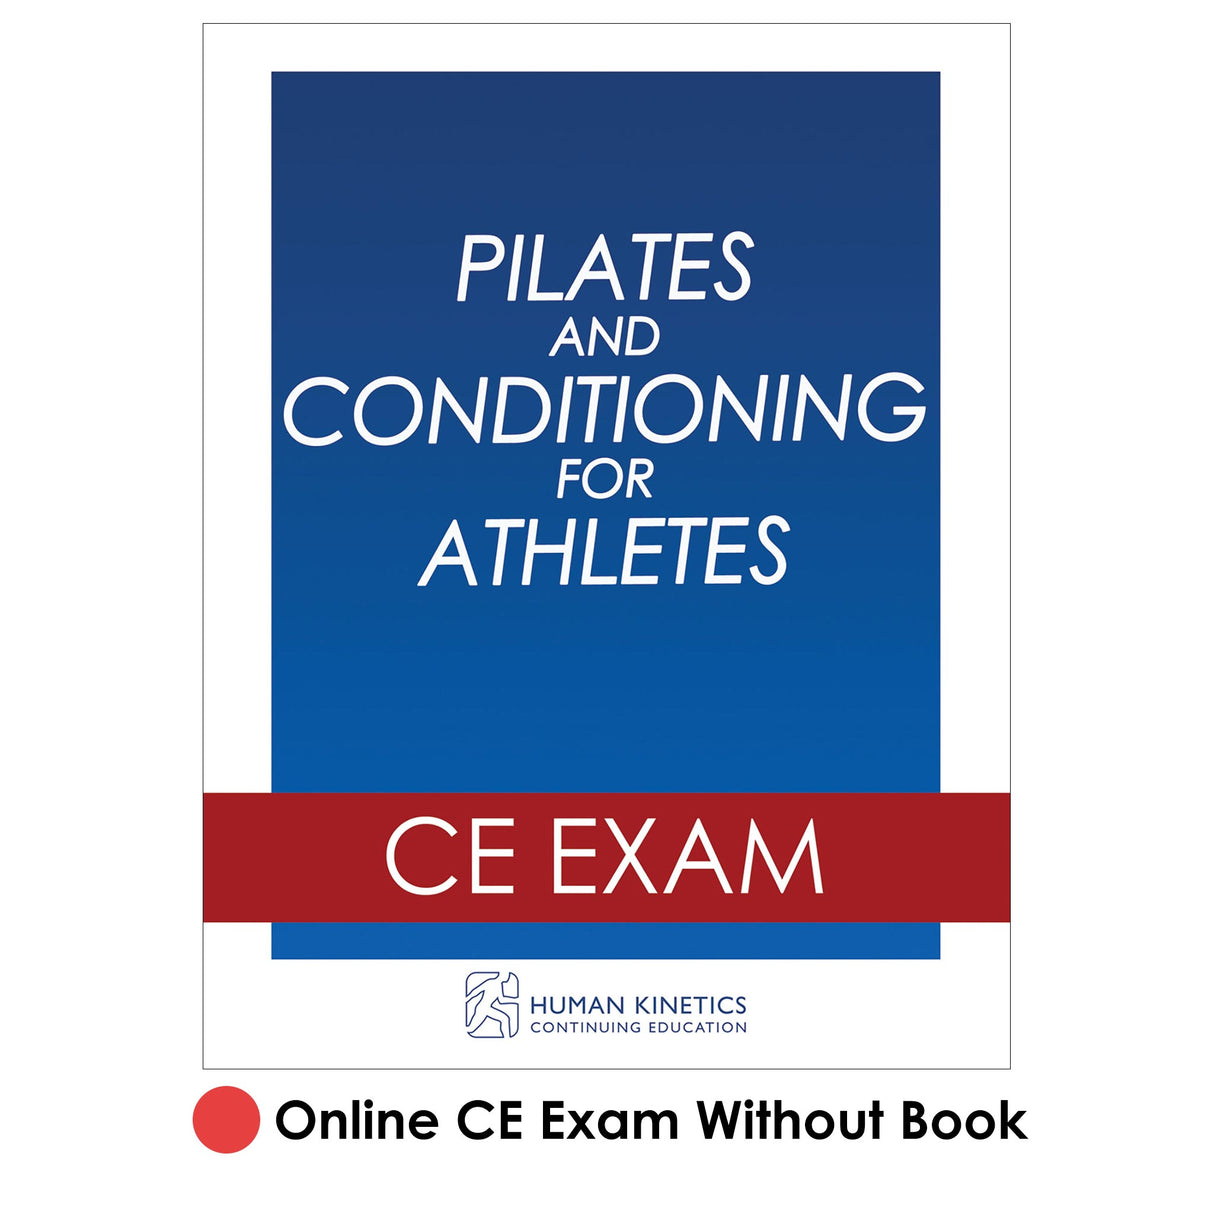 Pilates and Conditioning for Athletes Online CE Exam Without Book